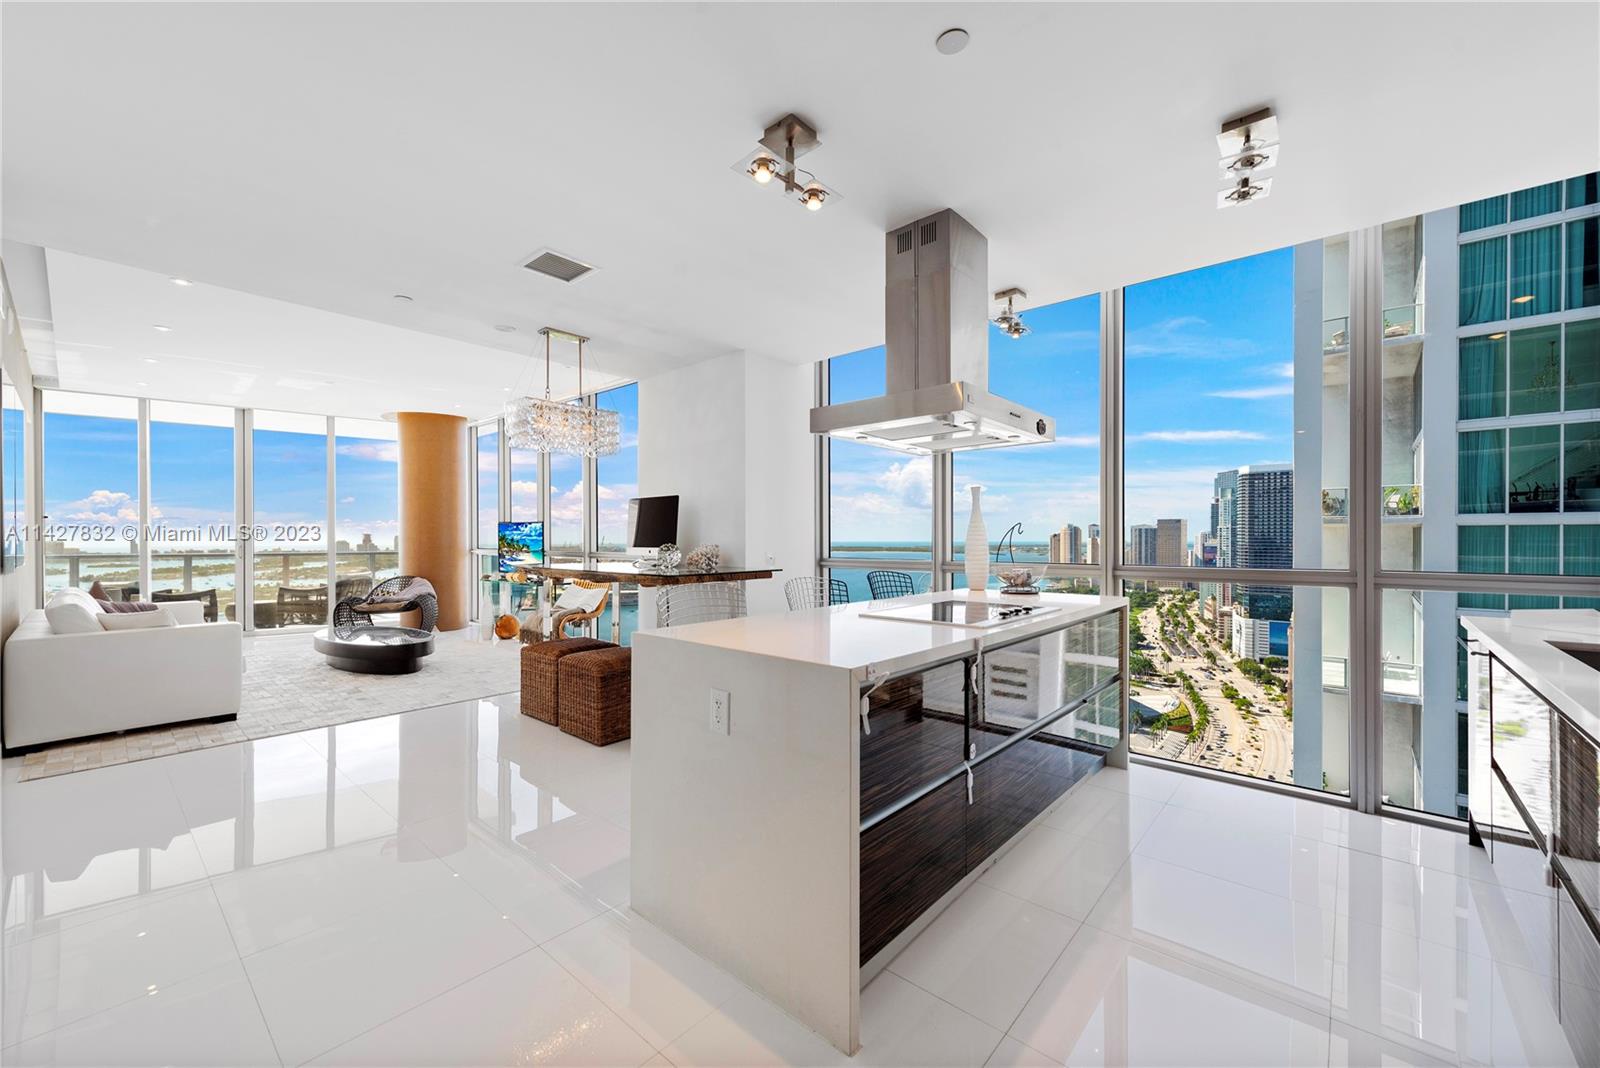 Prized high floor SE corner unit, dramatic views of Biscayne Bay and the Atlantic Ocean. This tastefully custom designed unit is a 3 bedroom 2 ½ bath with a private elevator. Full Amenity, True luxury building, in the most dynamic area of Downtown Miami, steps to Adrien Arsht Center, The Museums, and the oncoming Miami Worldcenter. Tremendous Value Pricing on this unit. Easy to show!